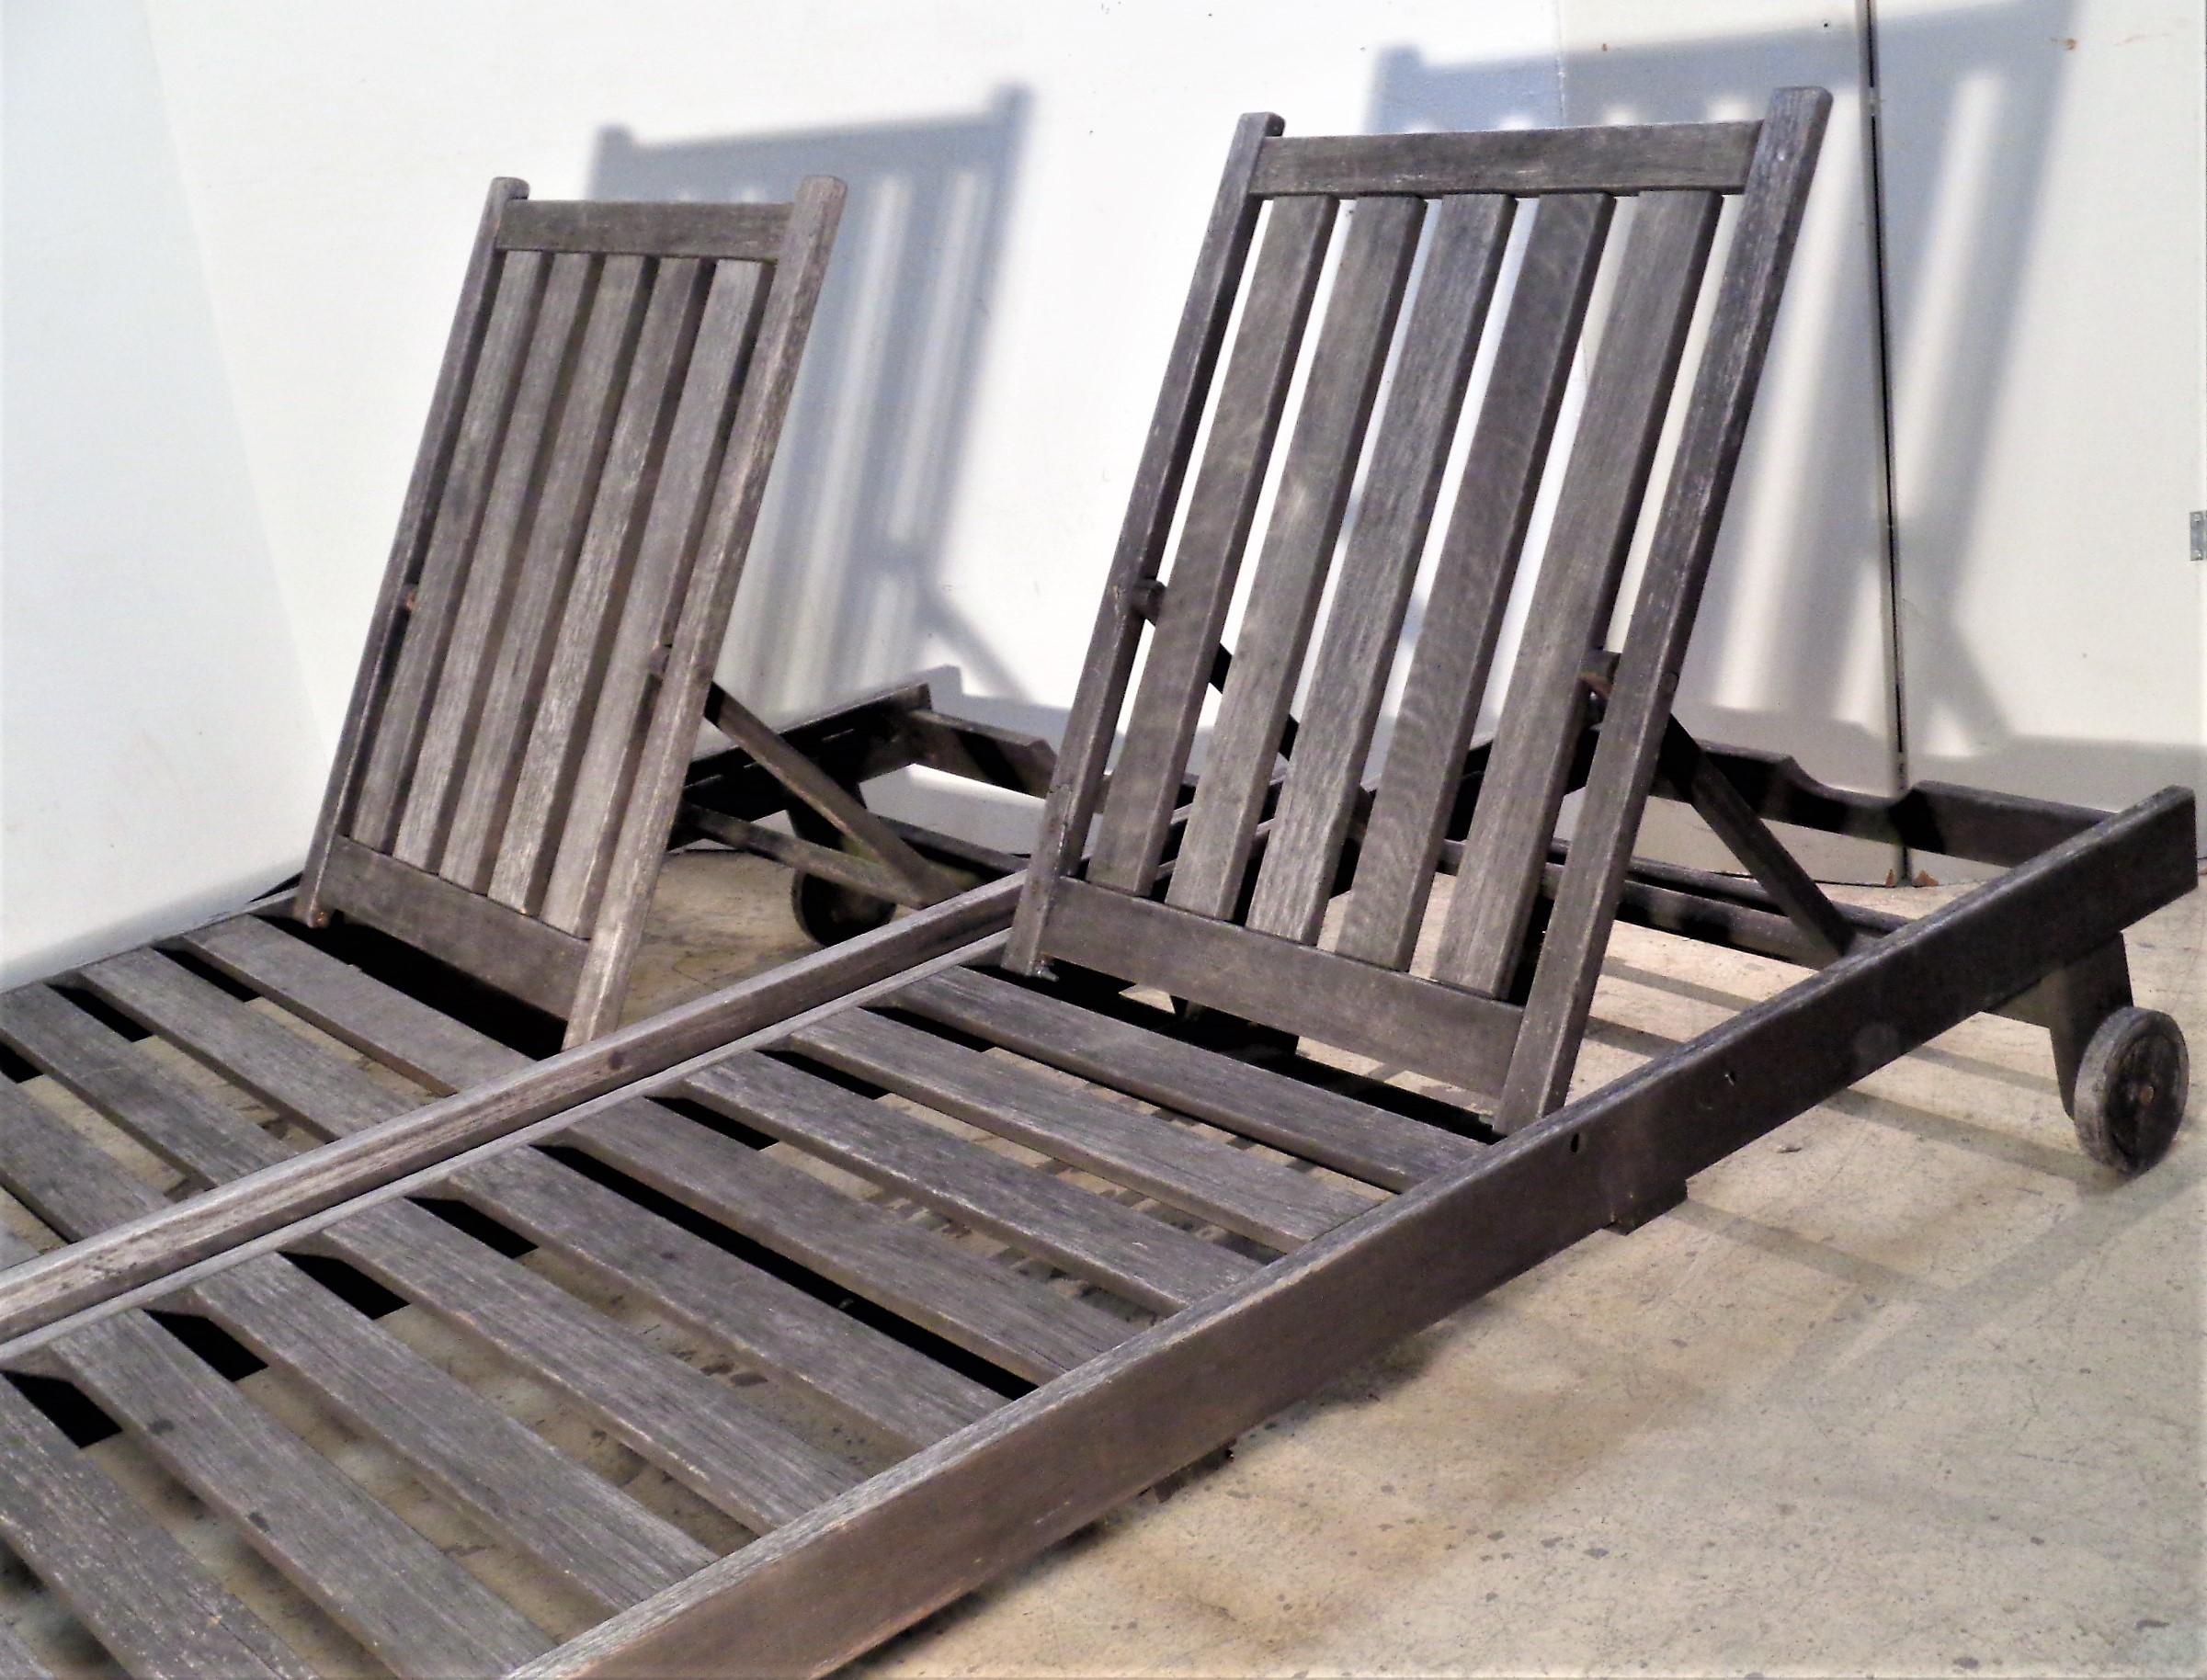 Pair Outdoor Teak Modernist Design Reclining Chaise Lounges, 1980's For Sale 11